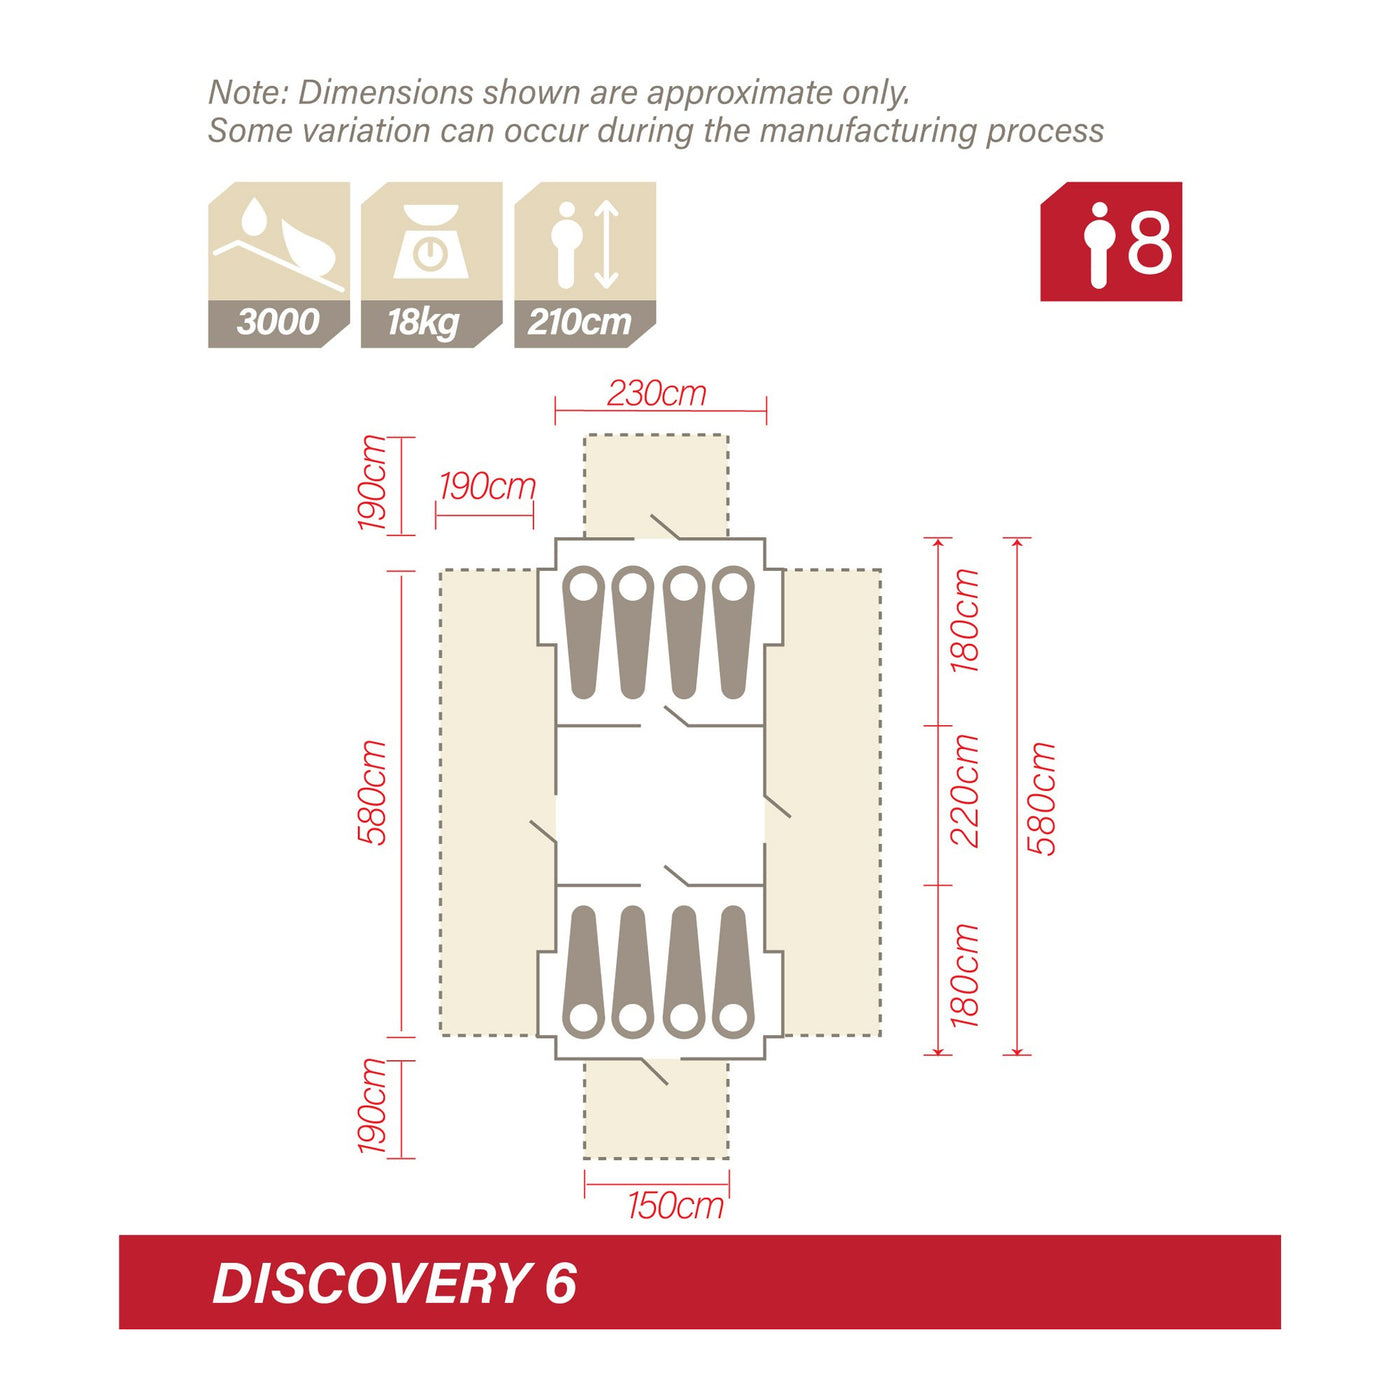 Dimensions and footprint of Discovery 6 tent